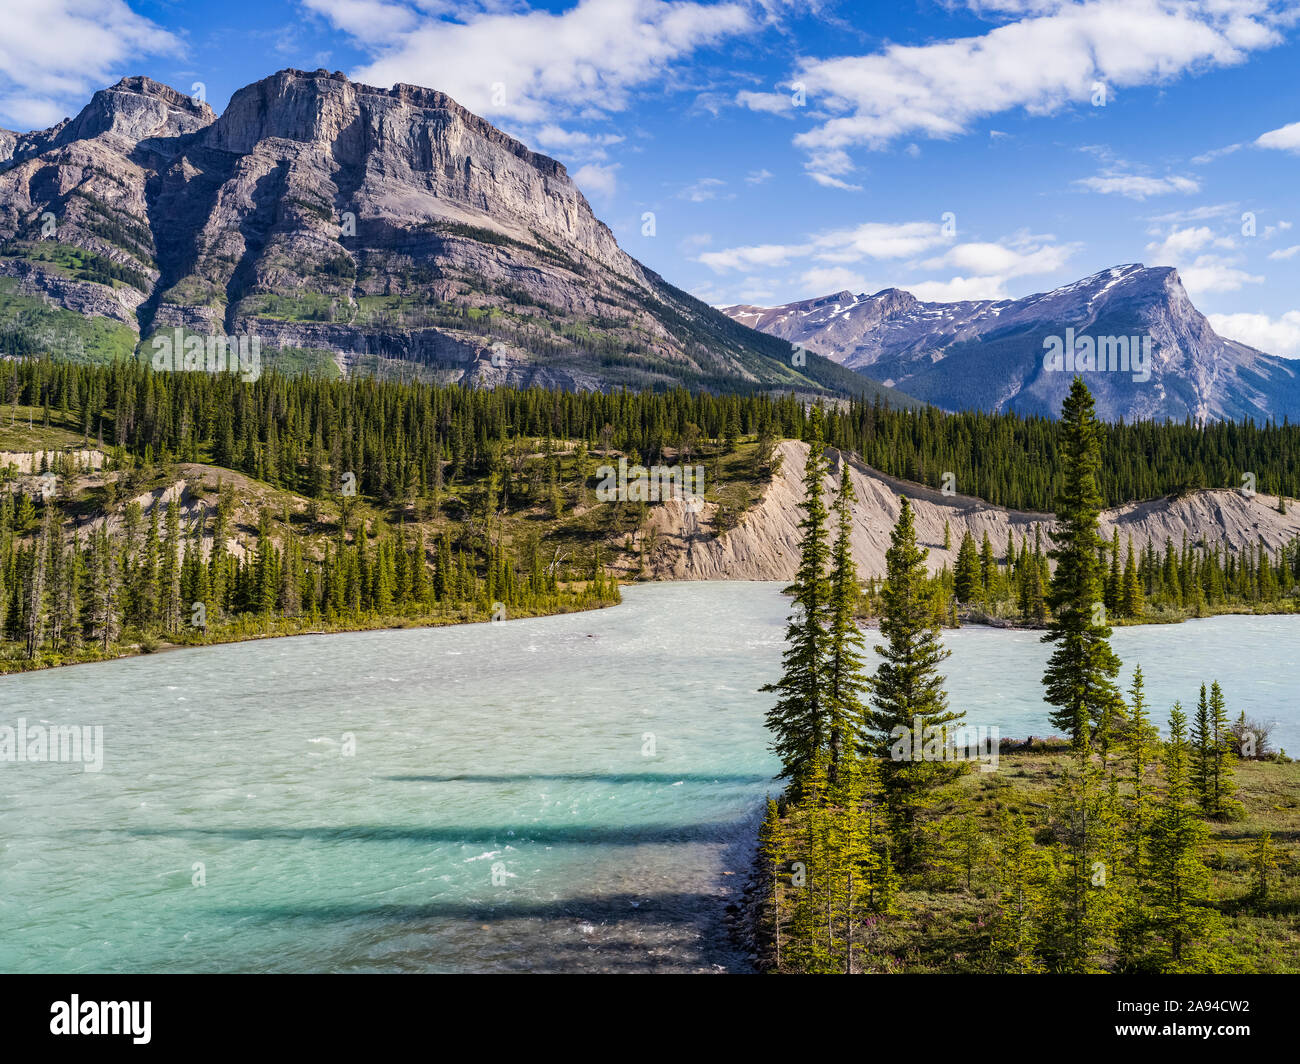 Rugged rocky mountains and forest along the Athabasca River and Icefield Parkway; Improvement District No. 9, Alberta, Canada Stock Photo